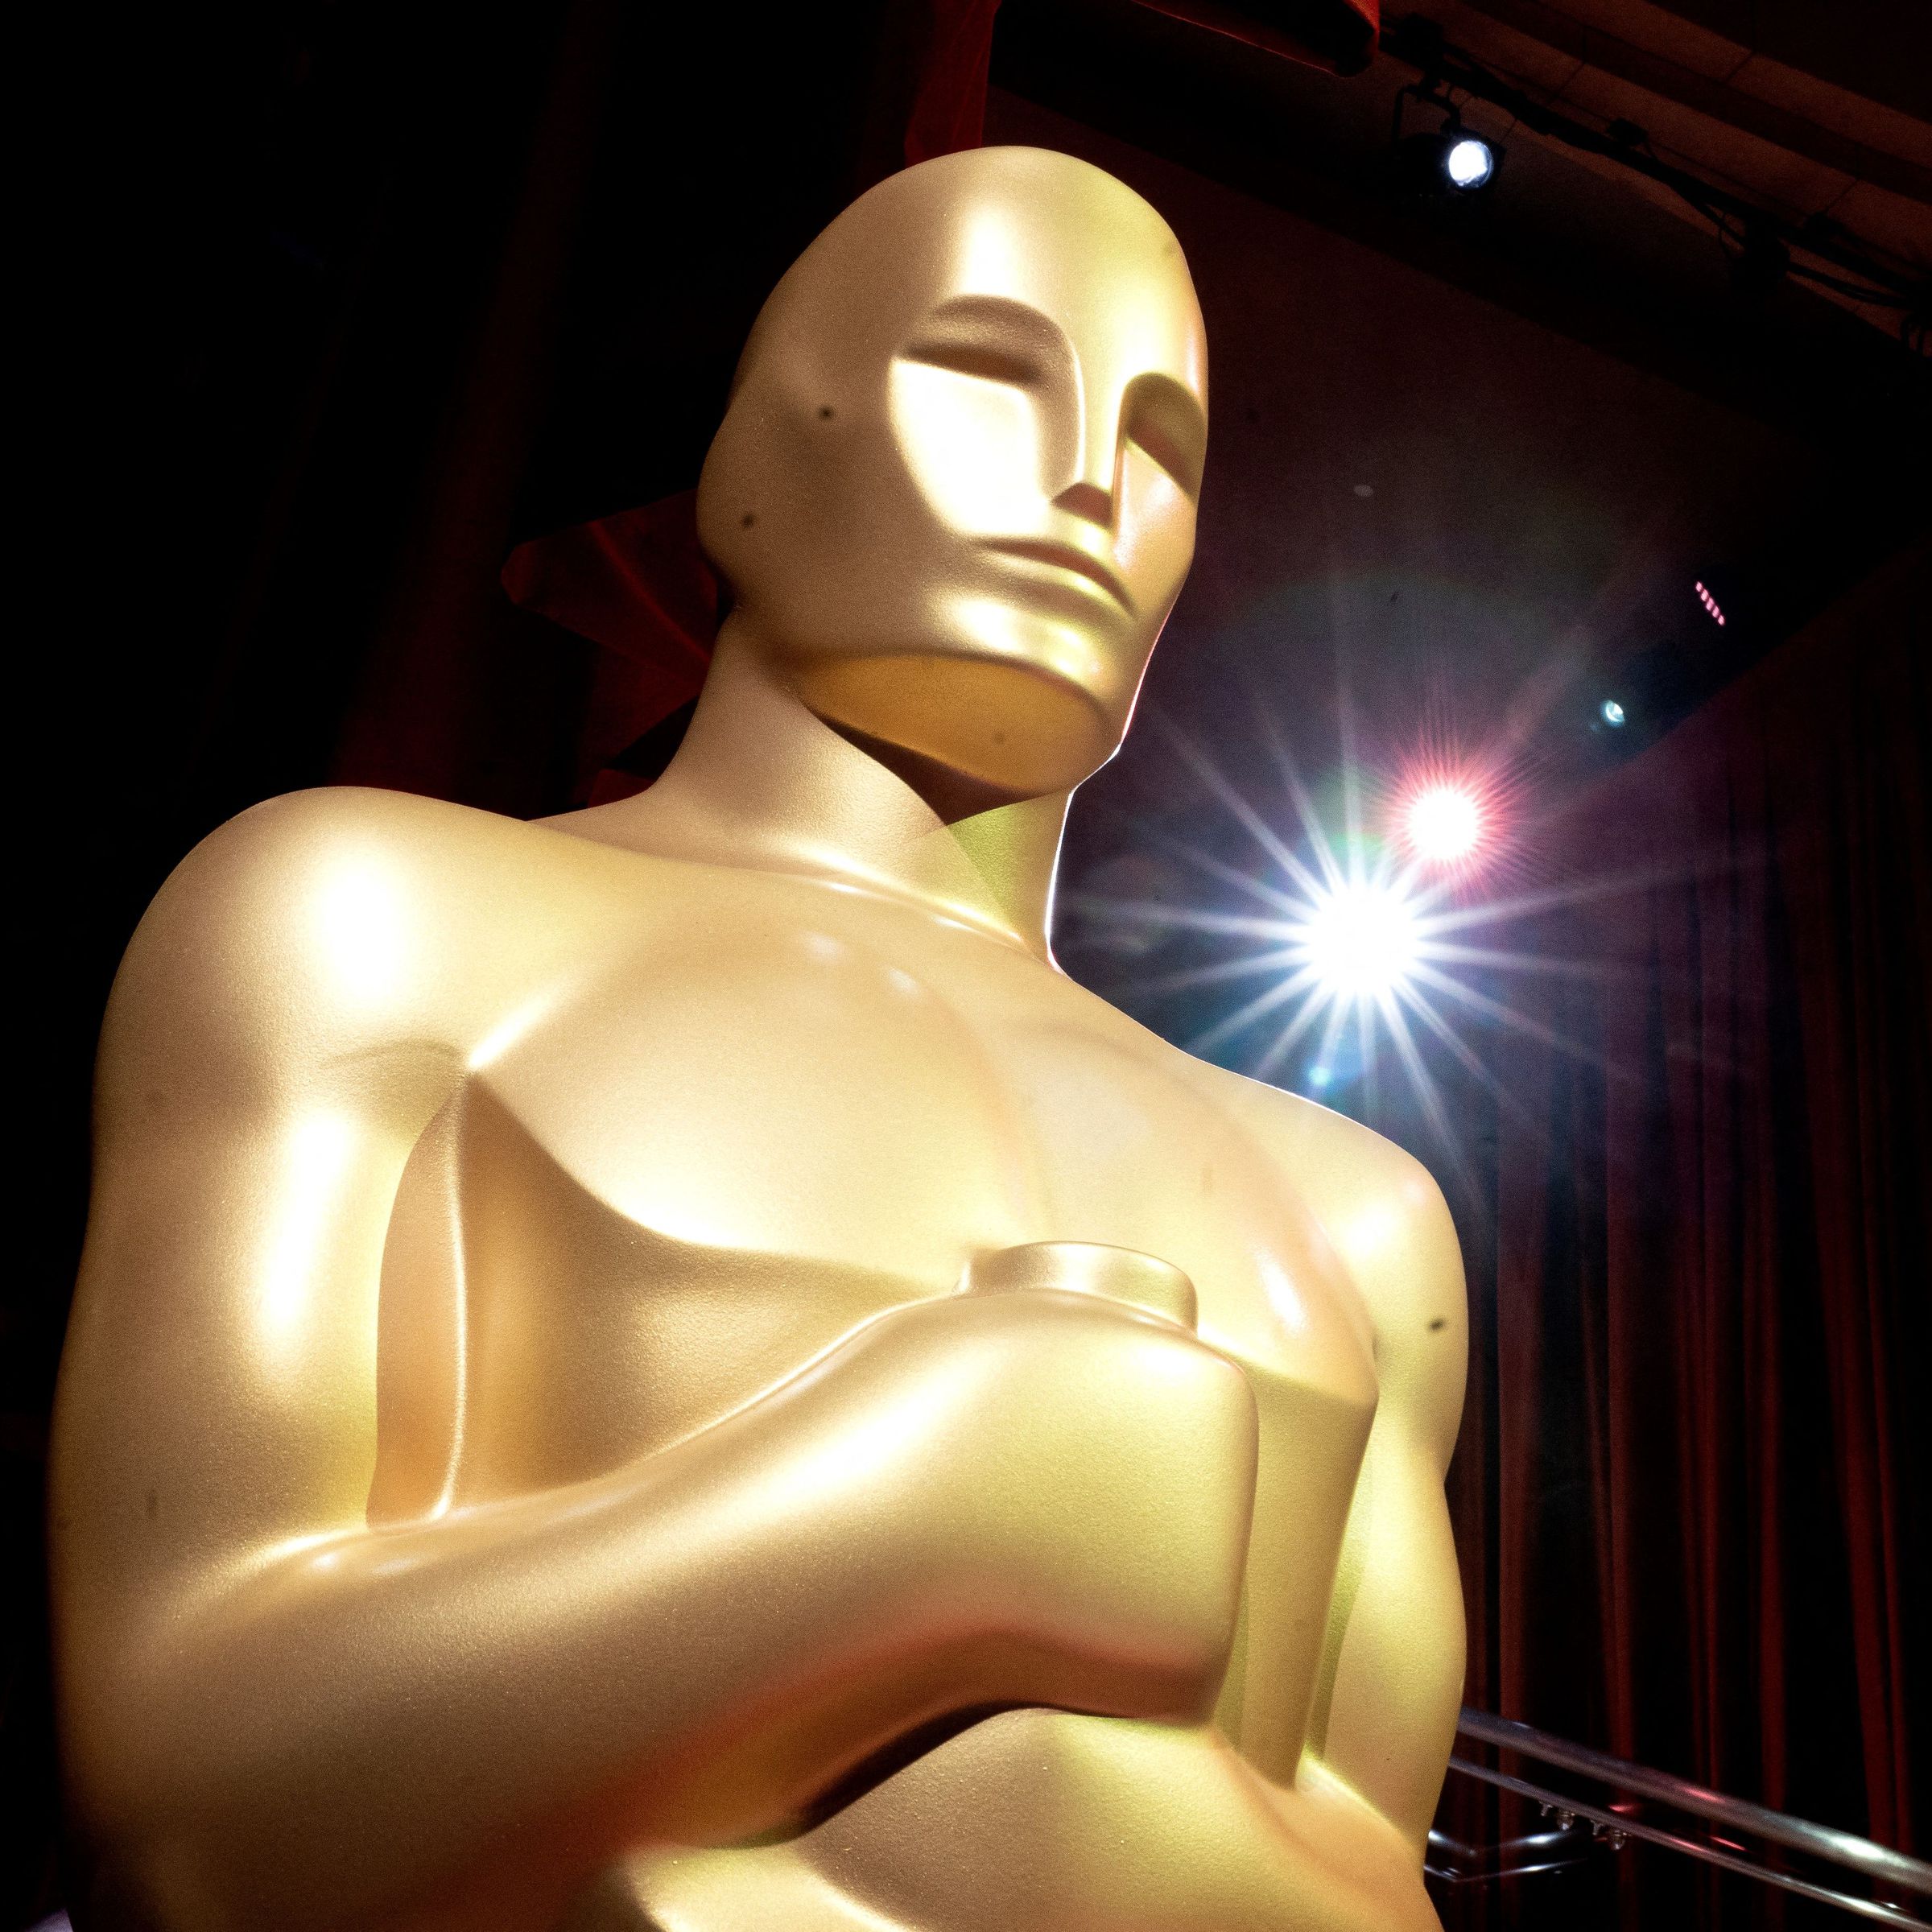 A photo showing a close-up of the Oscars statue